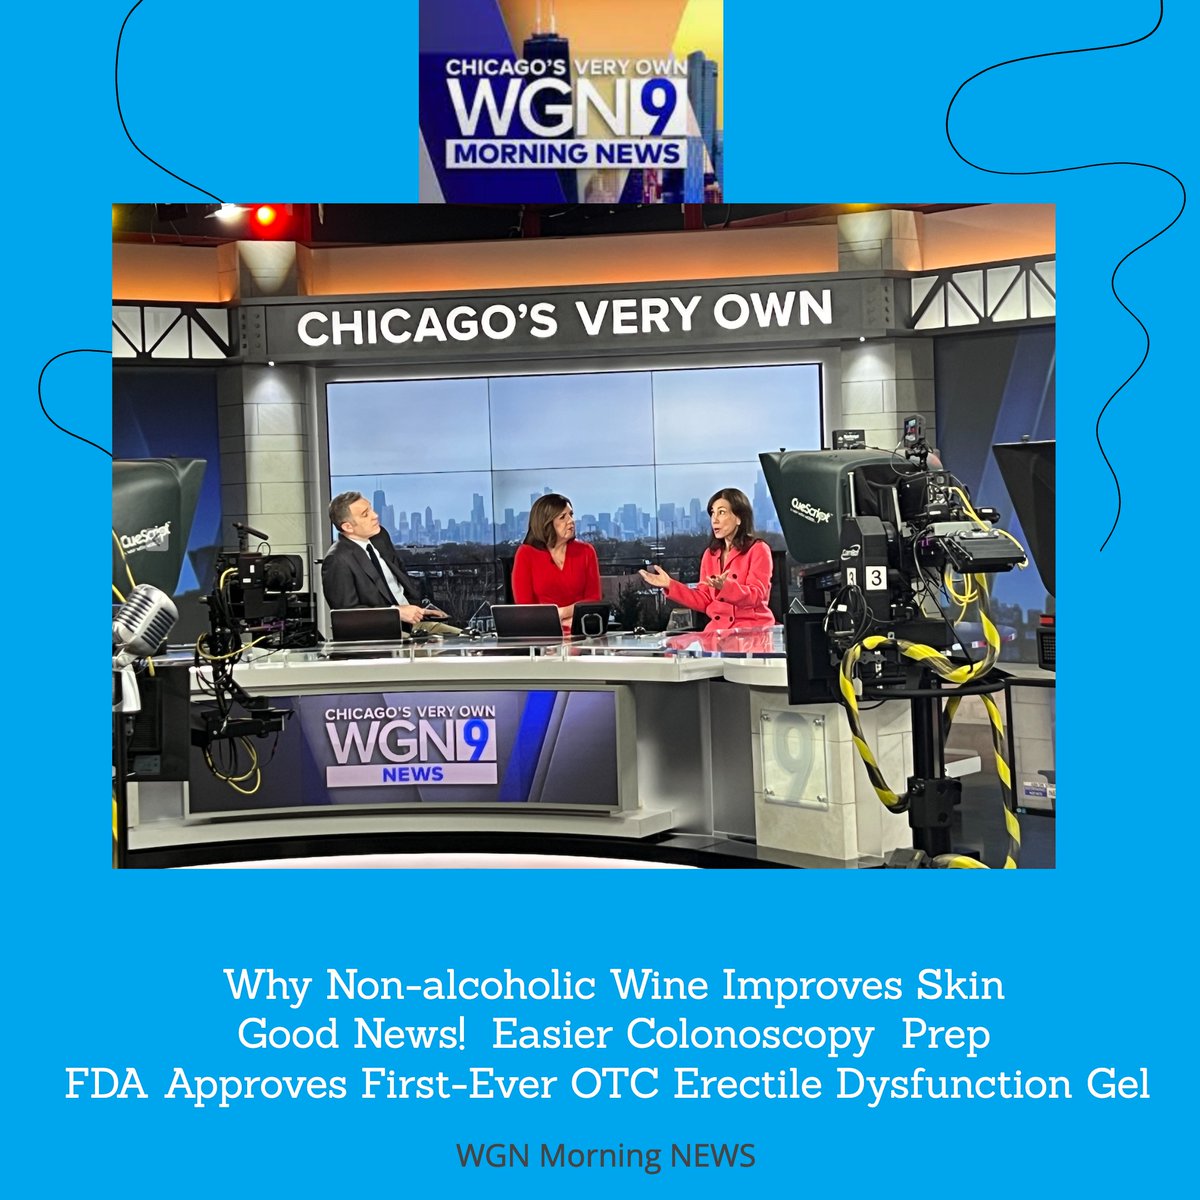 In case you missed it! This morning on @wgnmorningnews : why non-alcoholic muscadine wine will increase facial skin elasticity and hydration, a new colonoscopy prep that's a little easier to swallow, an over-the-counter gel to treat ED. wgntv.com/video/dr-strei…